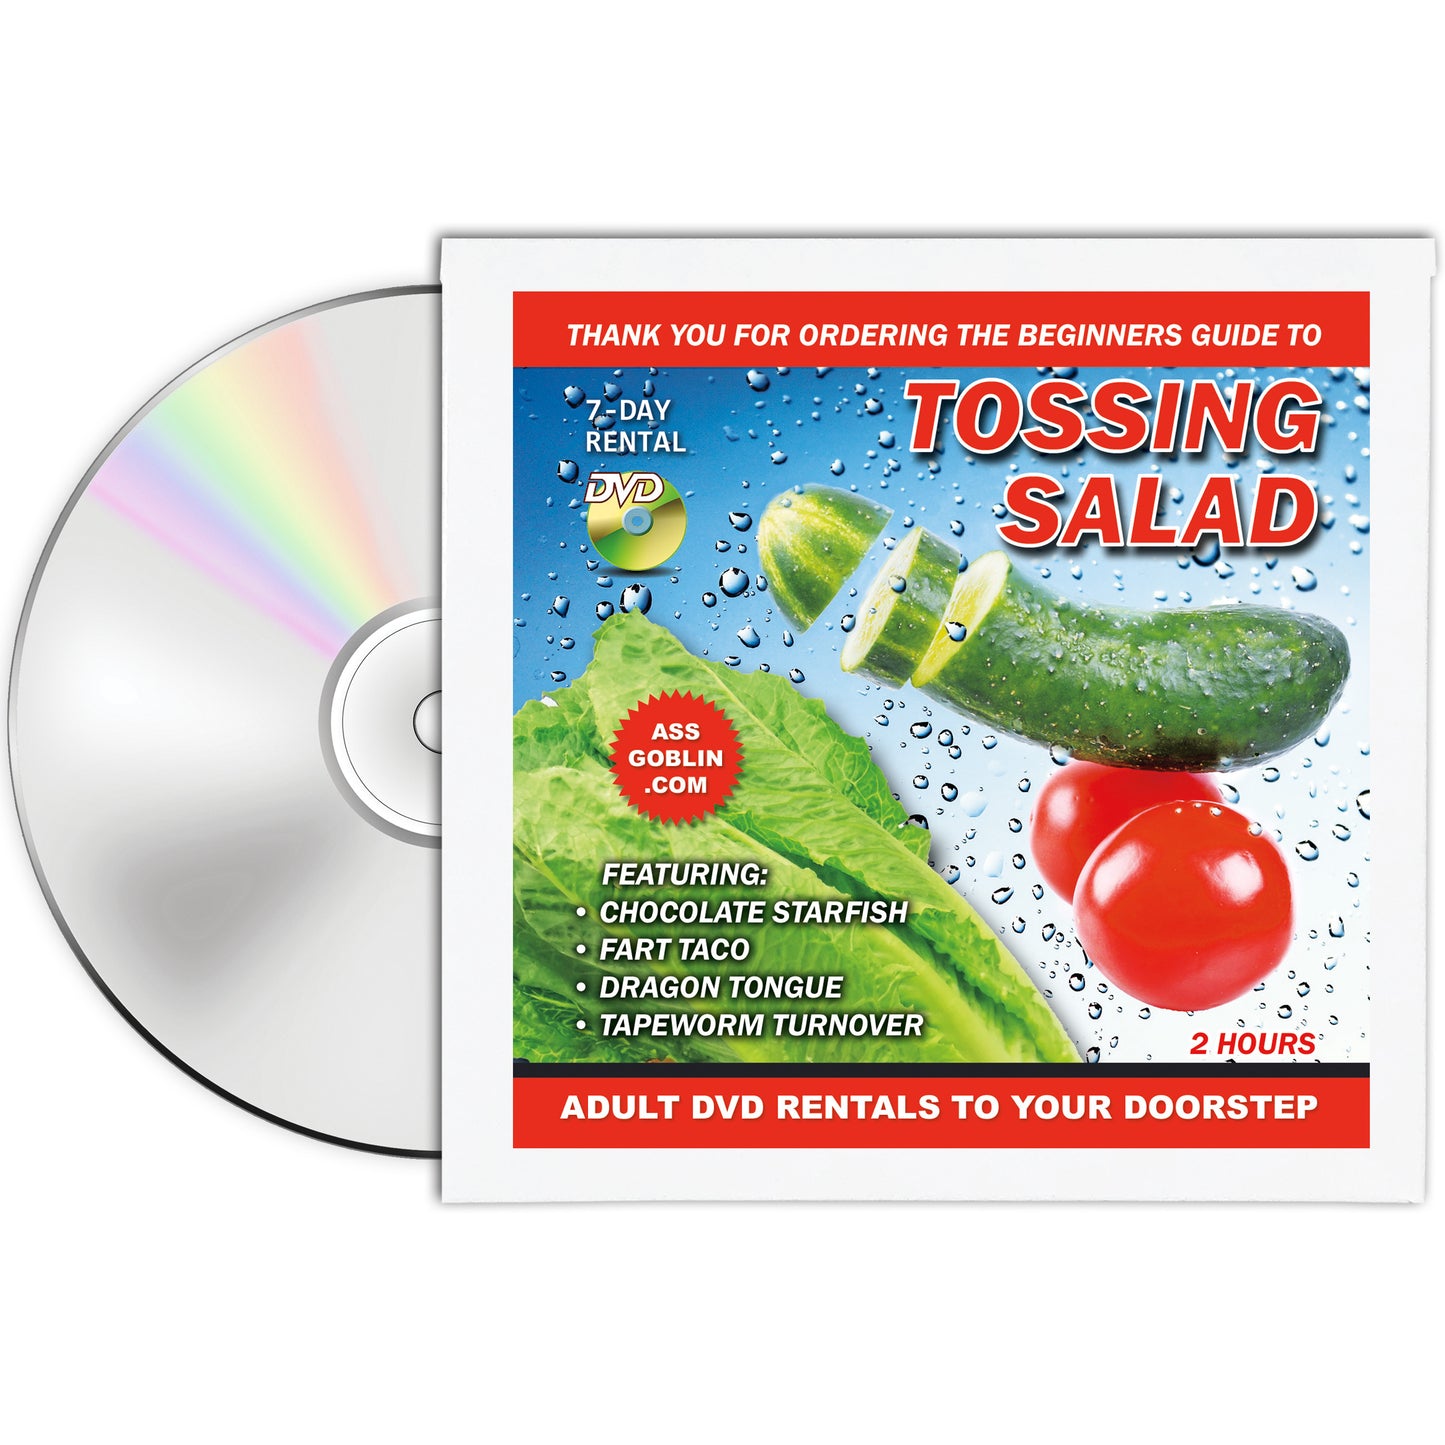 The Beginners Guide to Tossing Salad Fake DVD mail prank